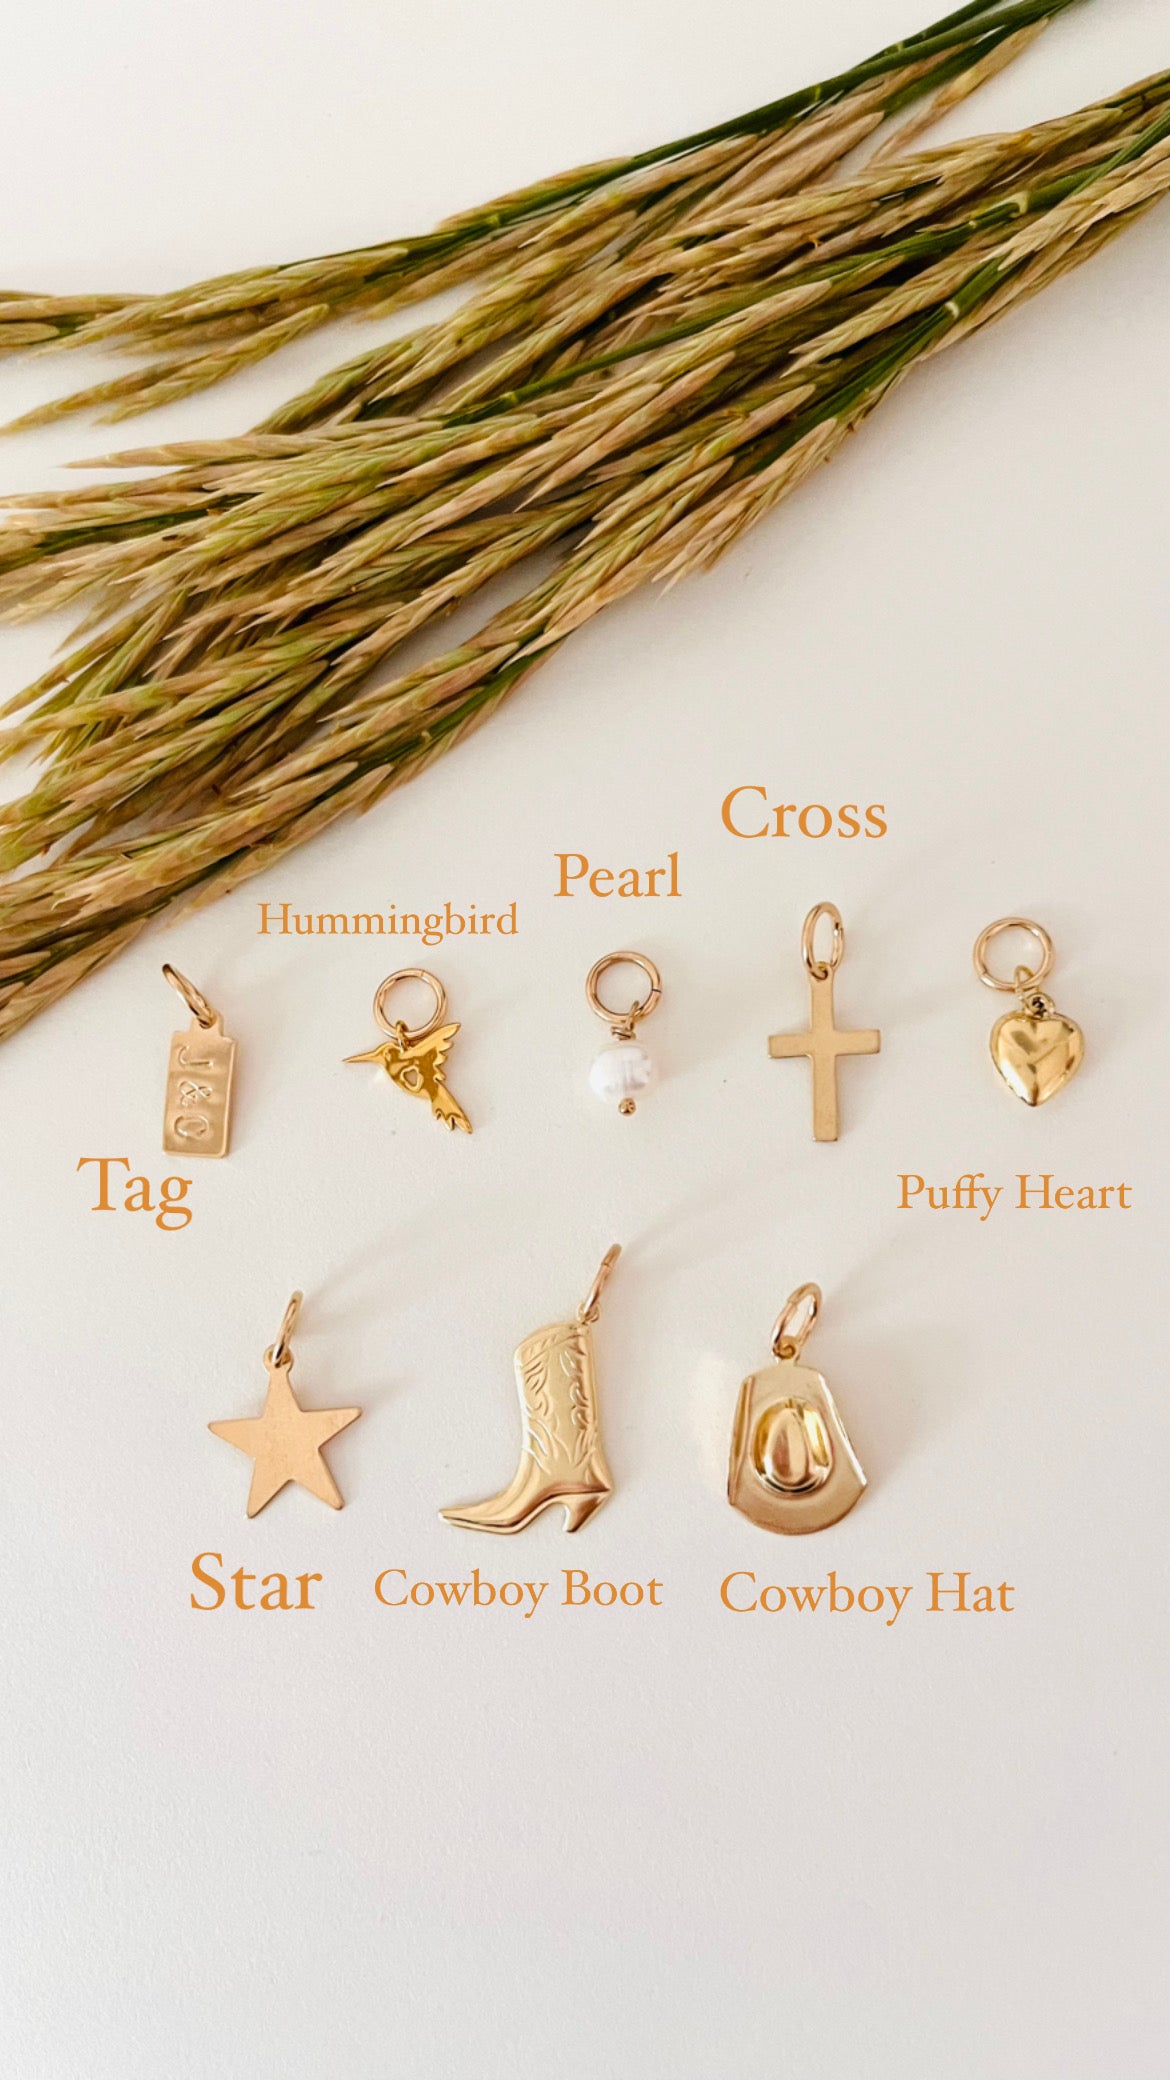 The Cowboy Collection, Cowboy Boot, Cowboy Hat, Cowboy Country Western Charm, Cross, Country Western Charm, Rodeo Cowgirl Jewelry